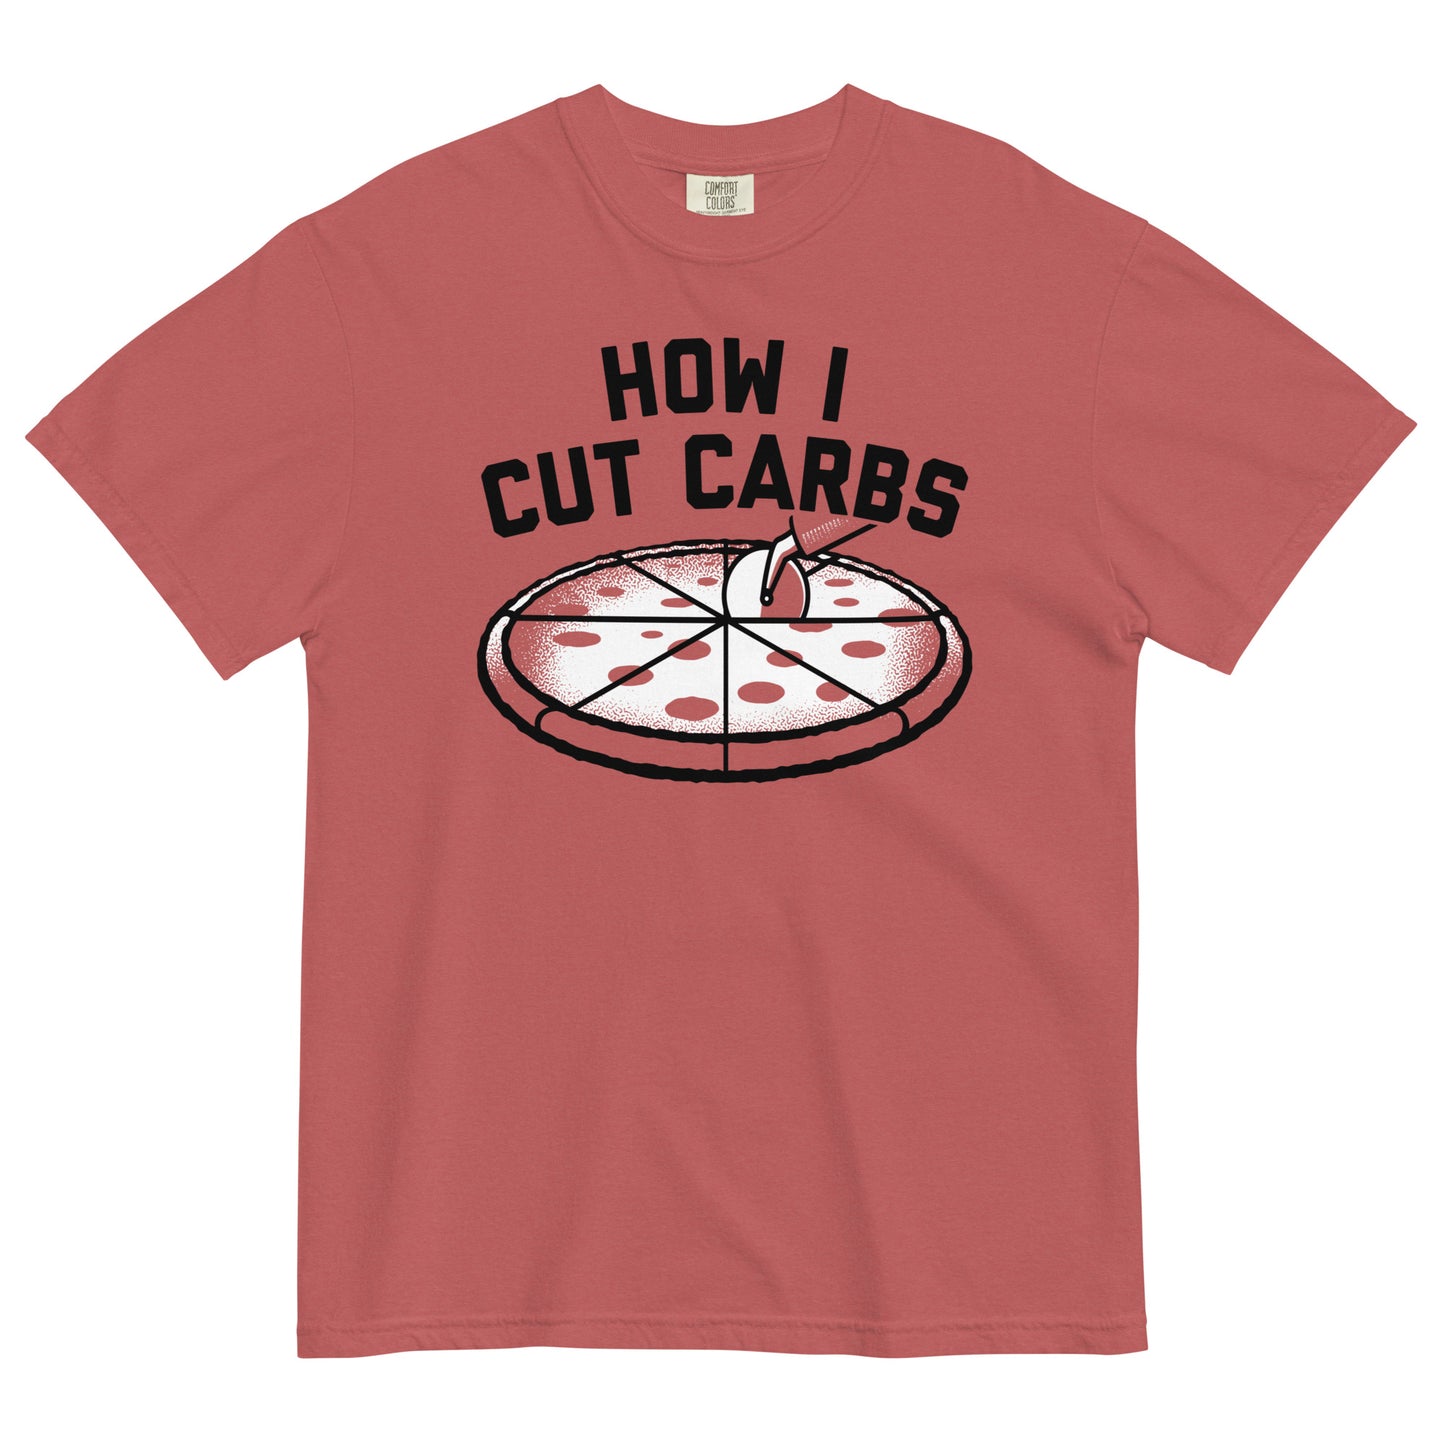 How I Cut Carbs Men's Relaxed Fit Tee